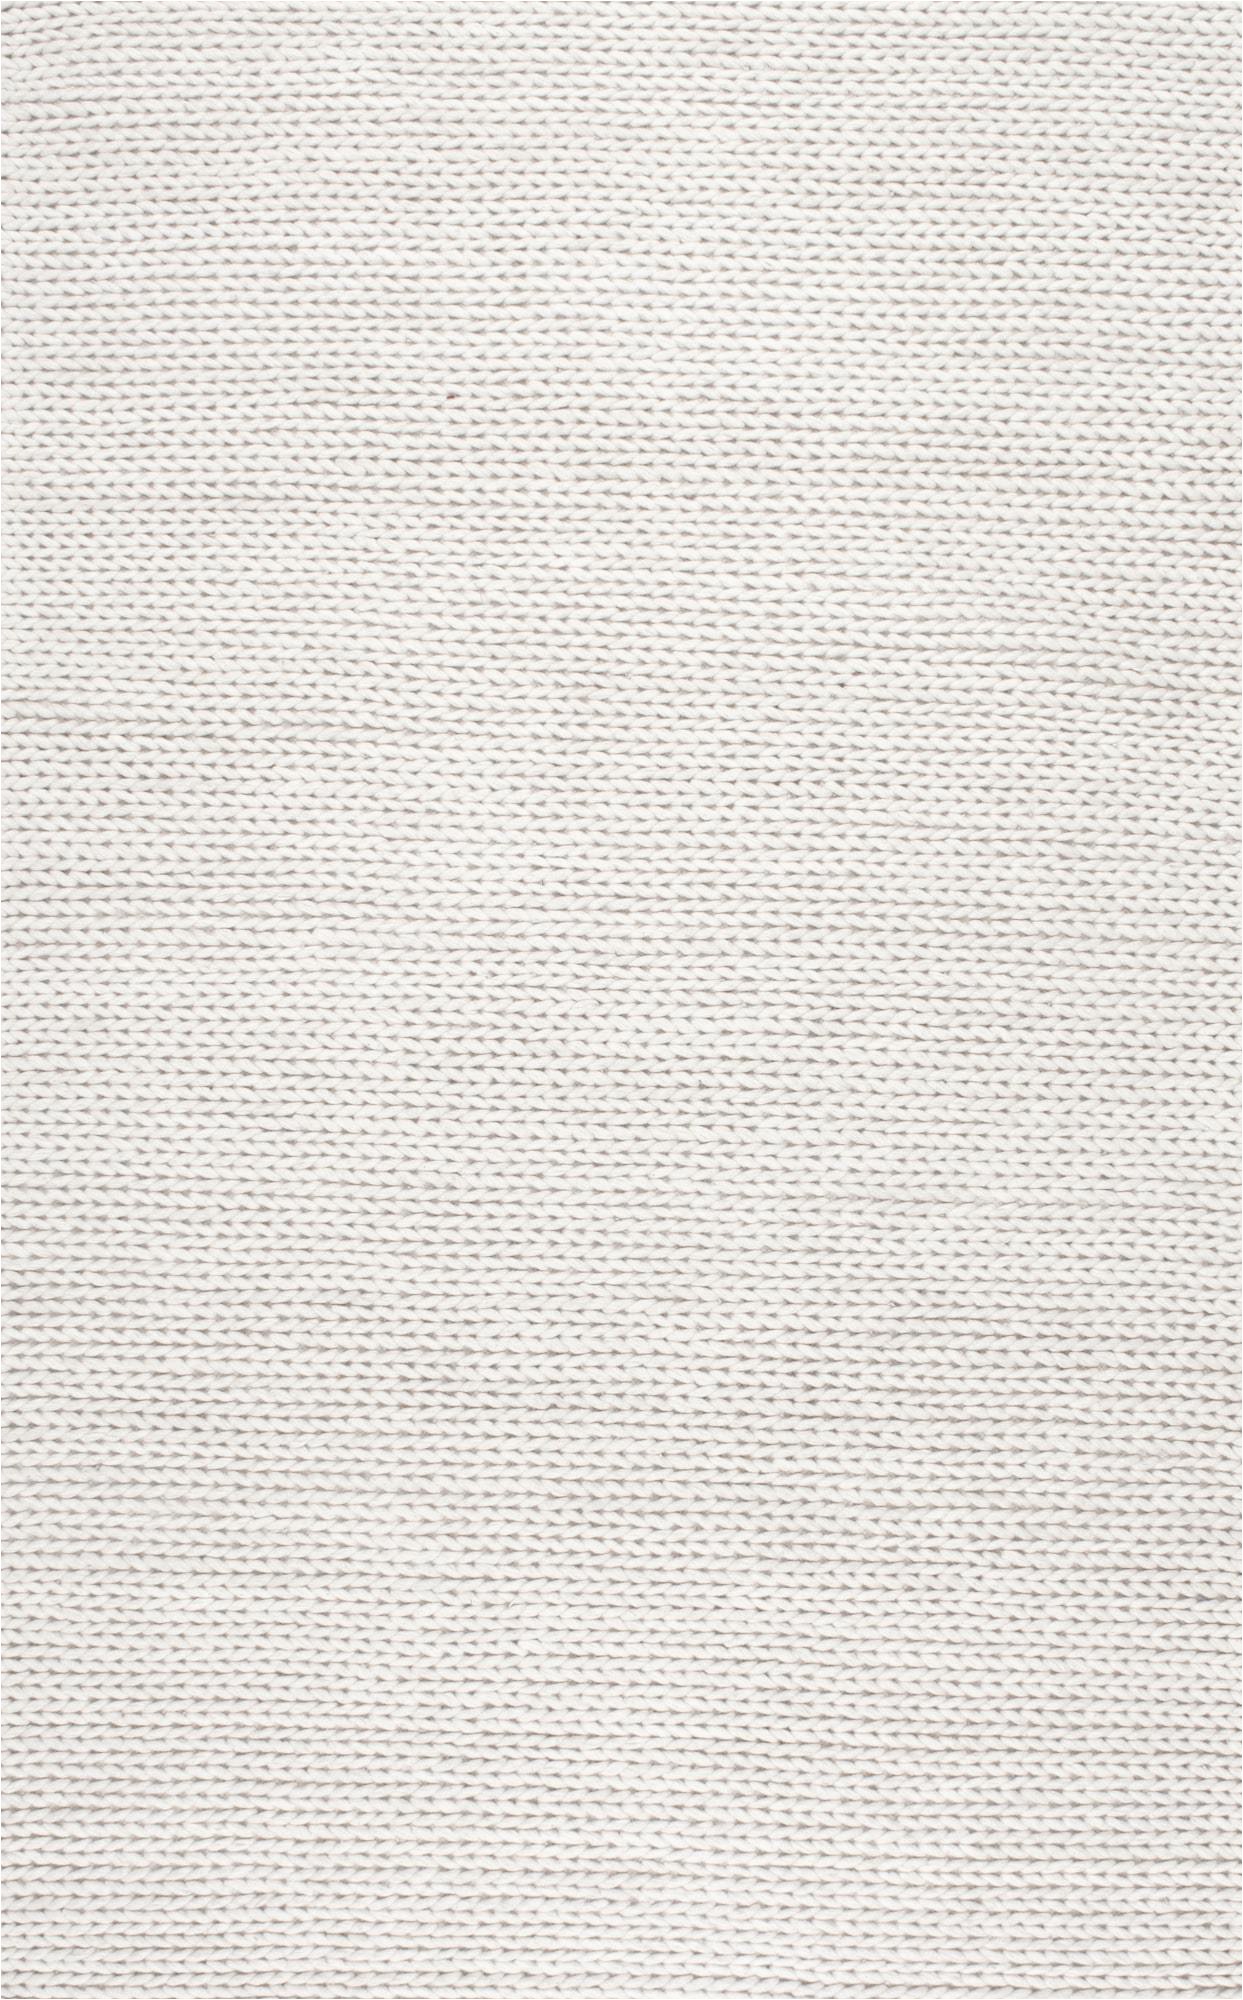 nuloom wool 8 x 10 rectangle area rugs in off white finish 200cb01 8010